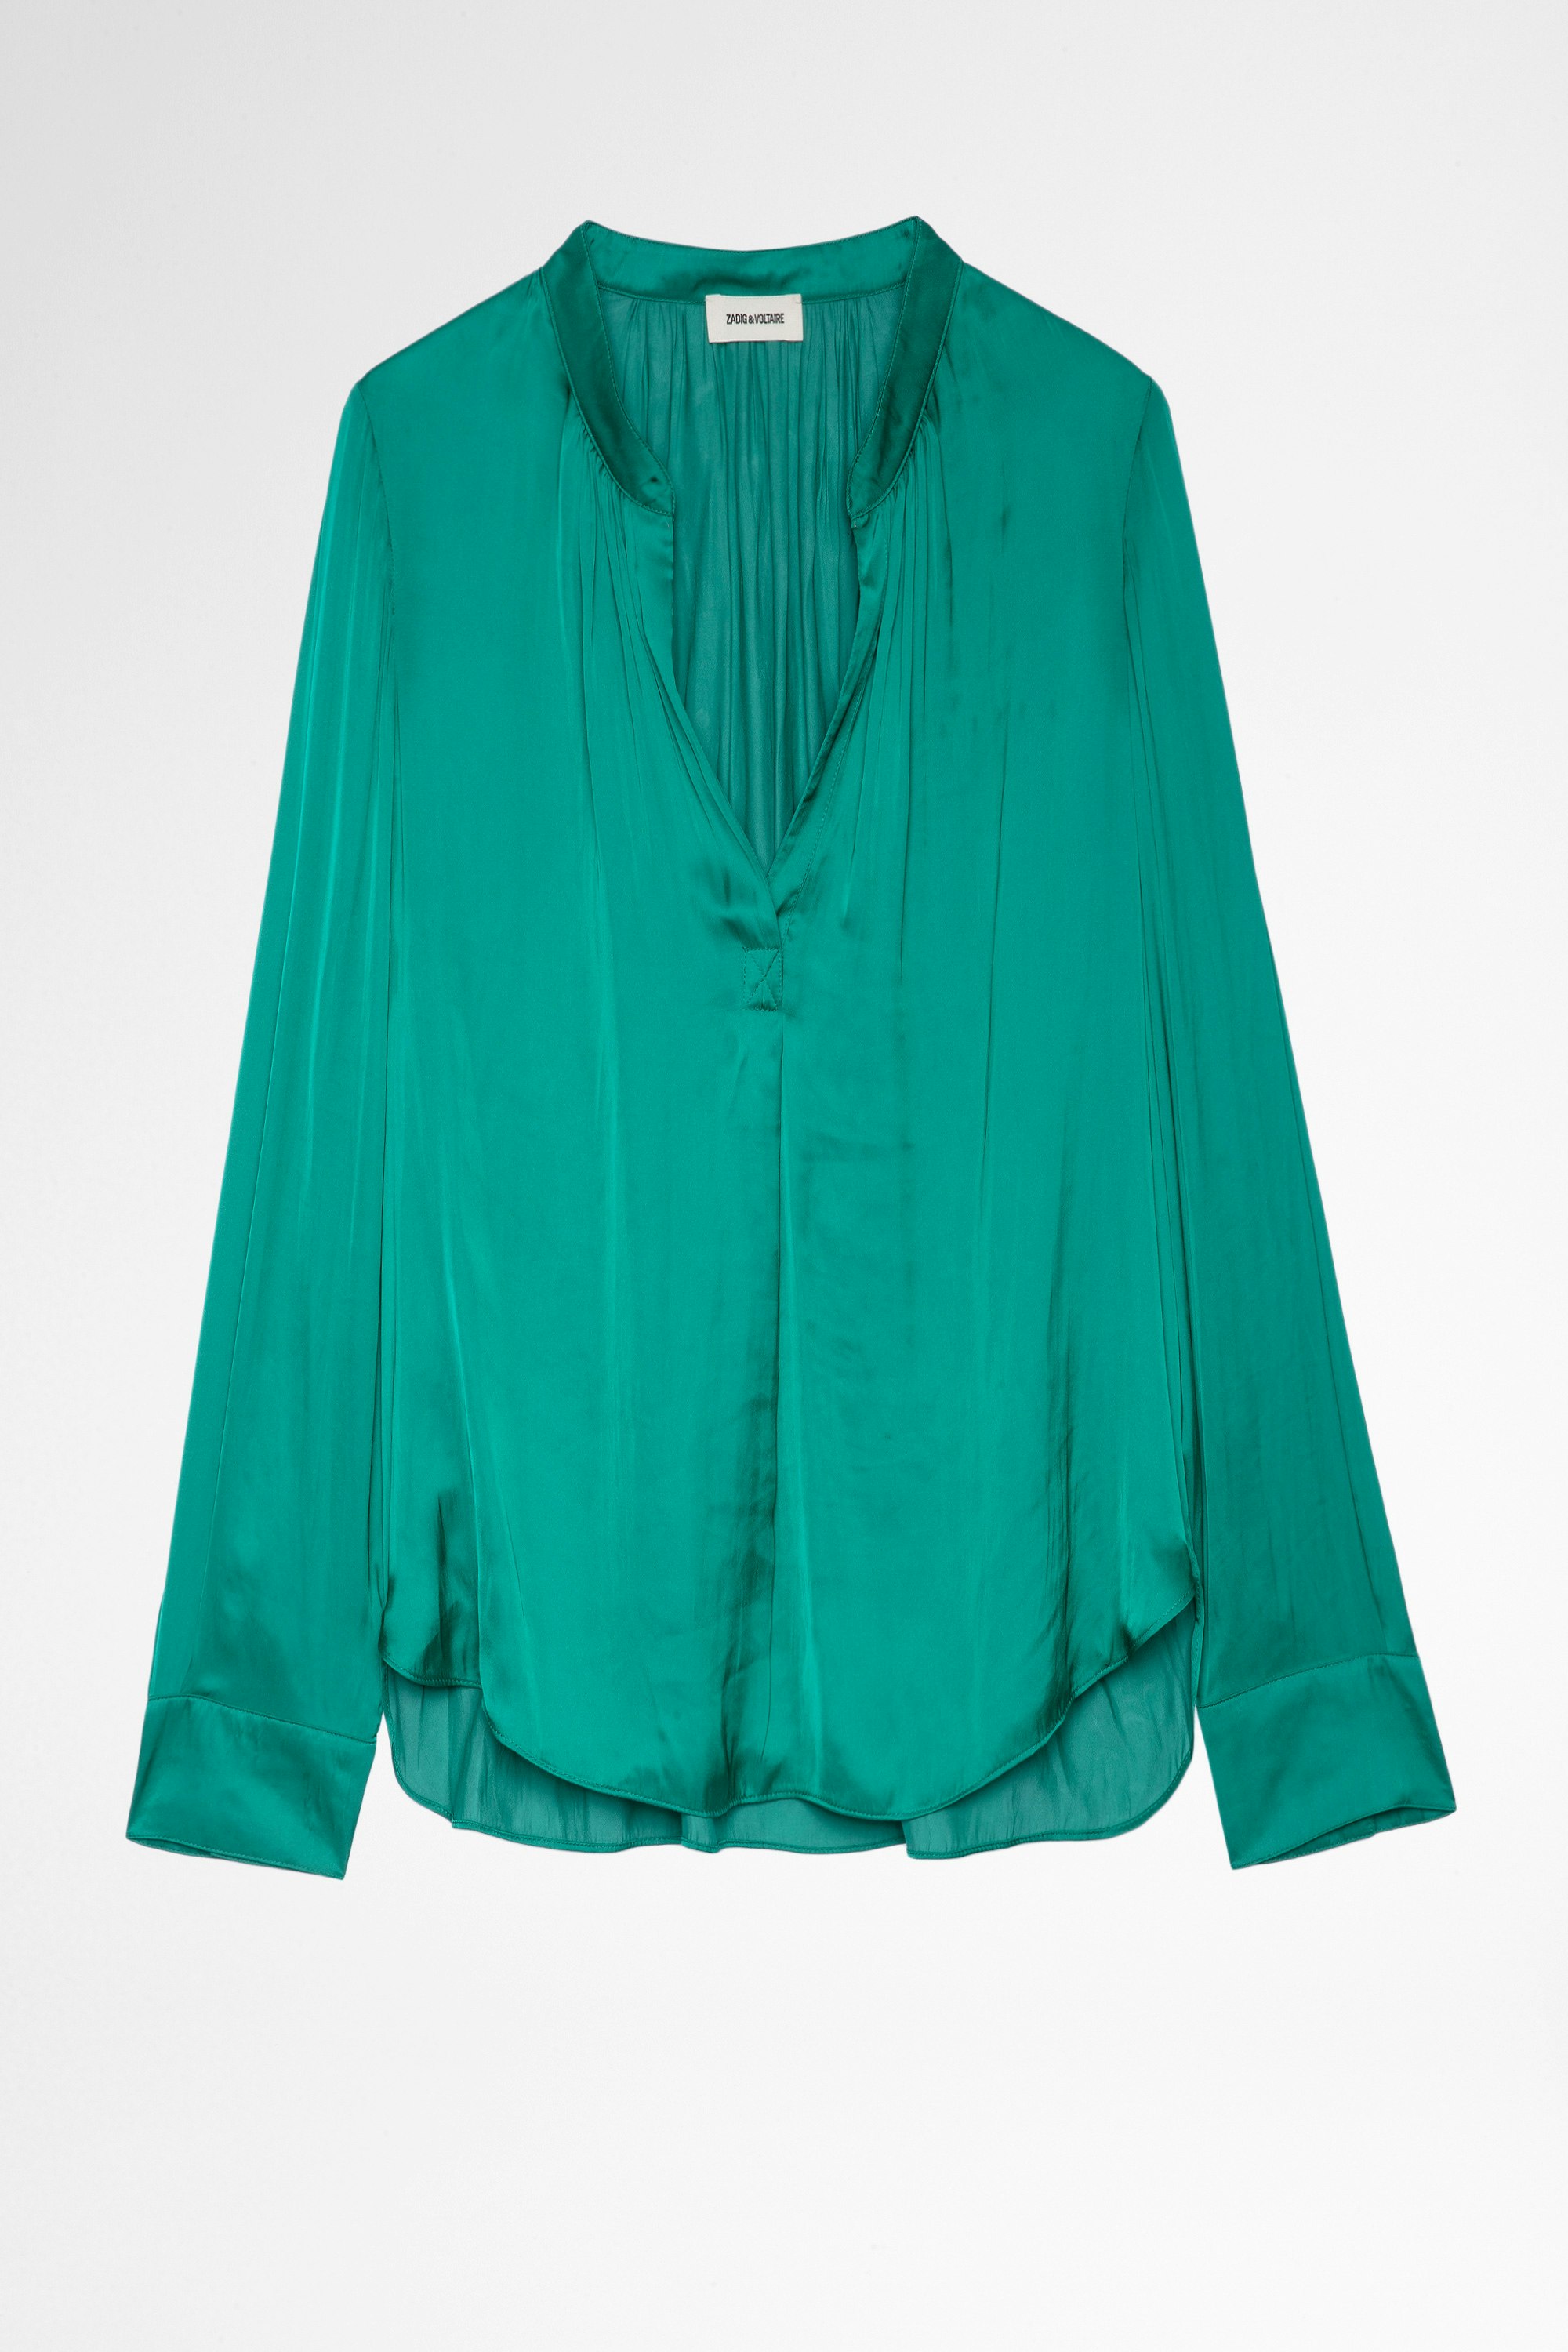 Women's chic blouses, camisoles, shirts and tops | Zadig&Voltaire